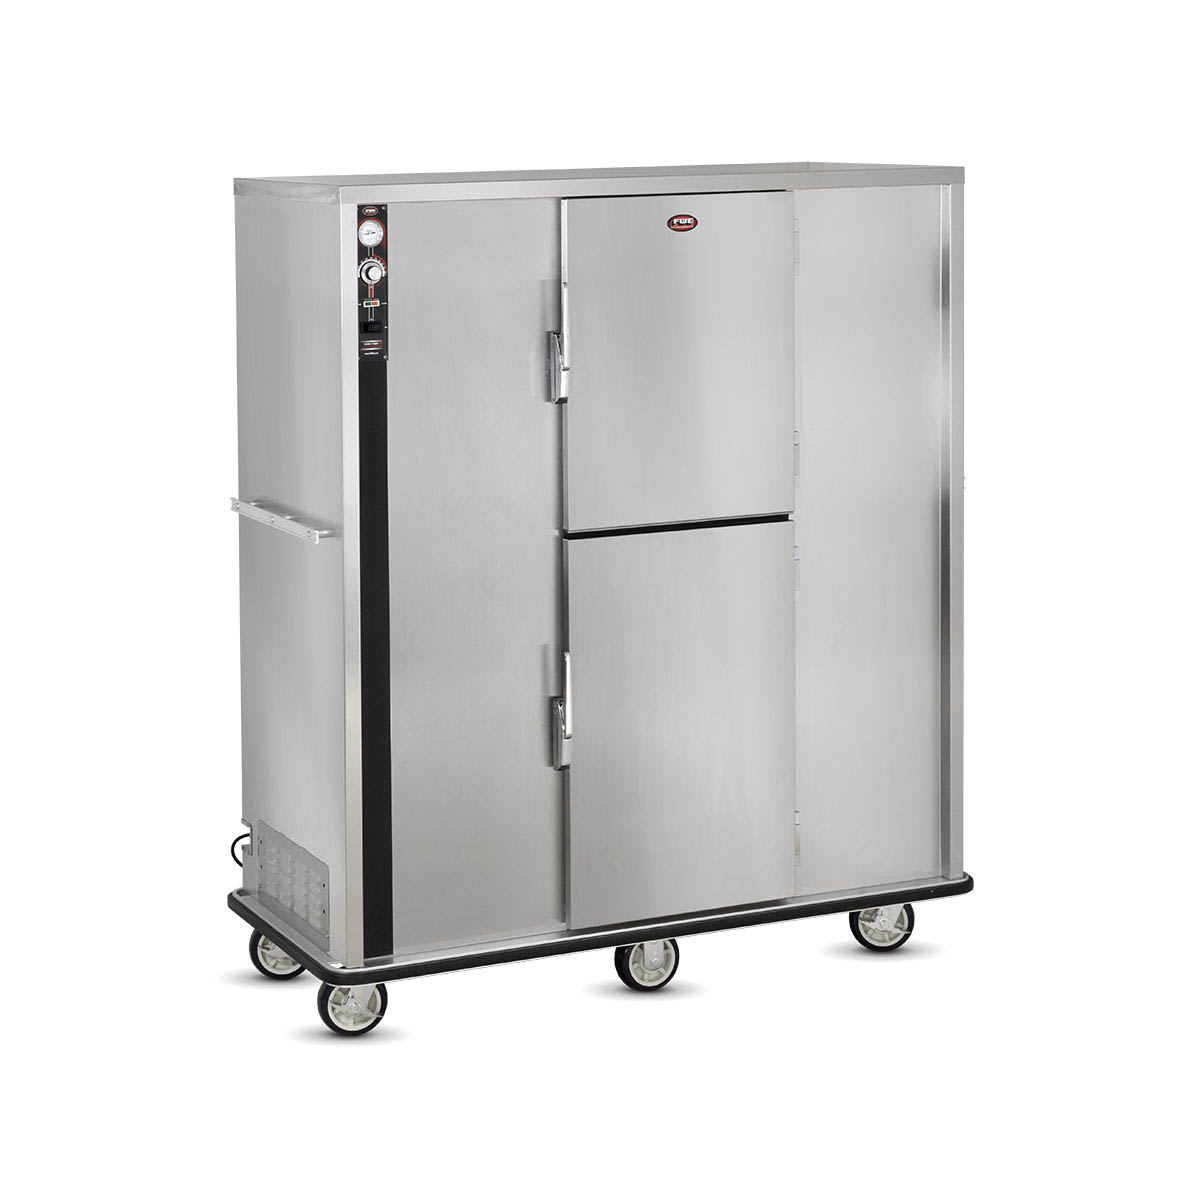 FWE P-200 Heated Banquet Cabinet, 160-200 Plates